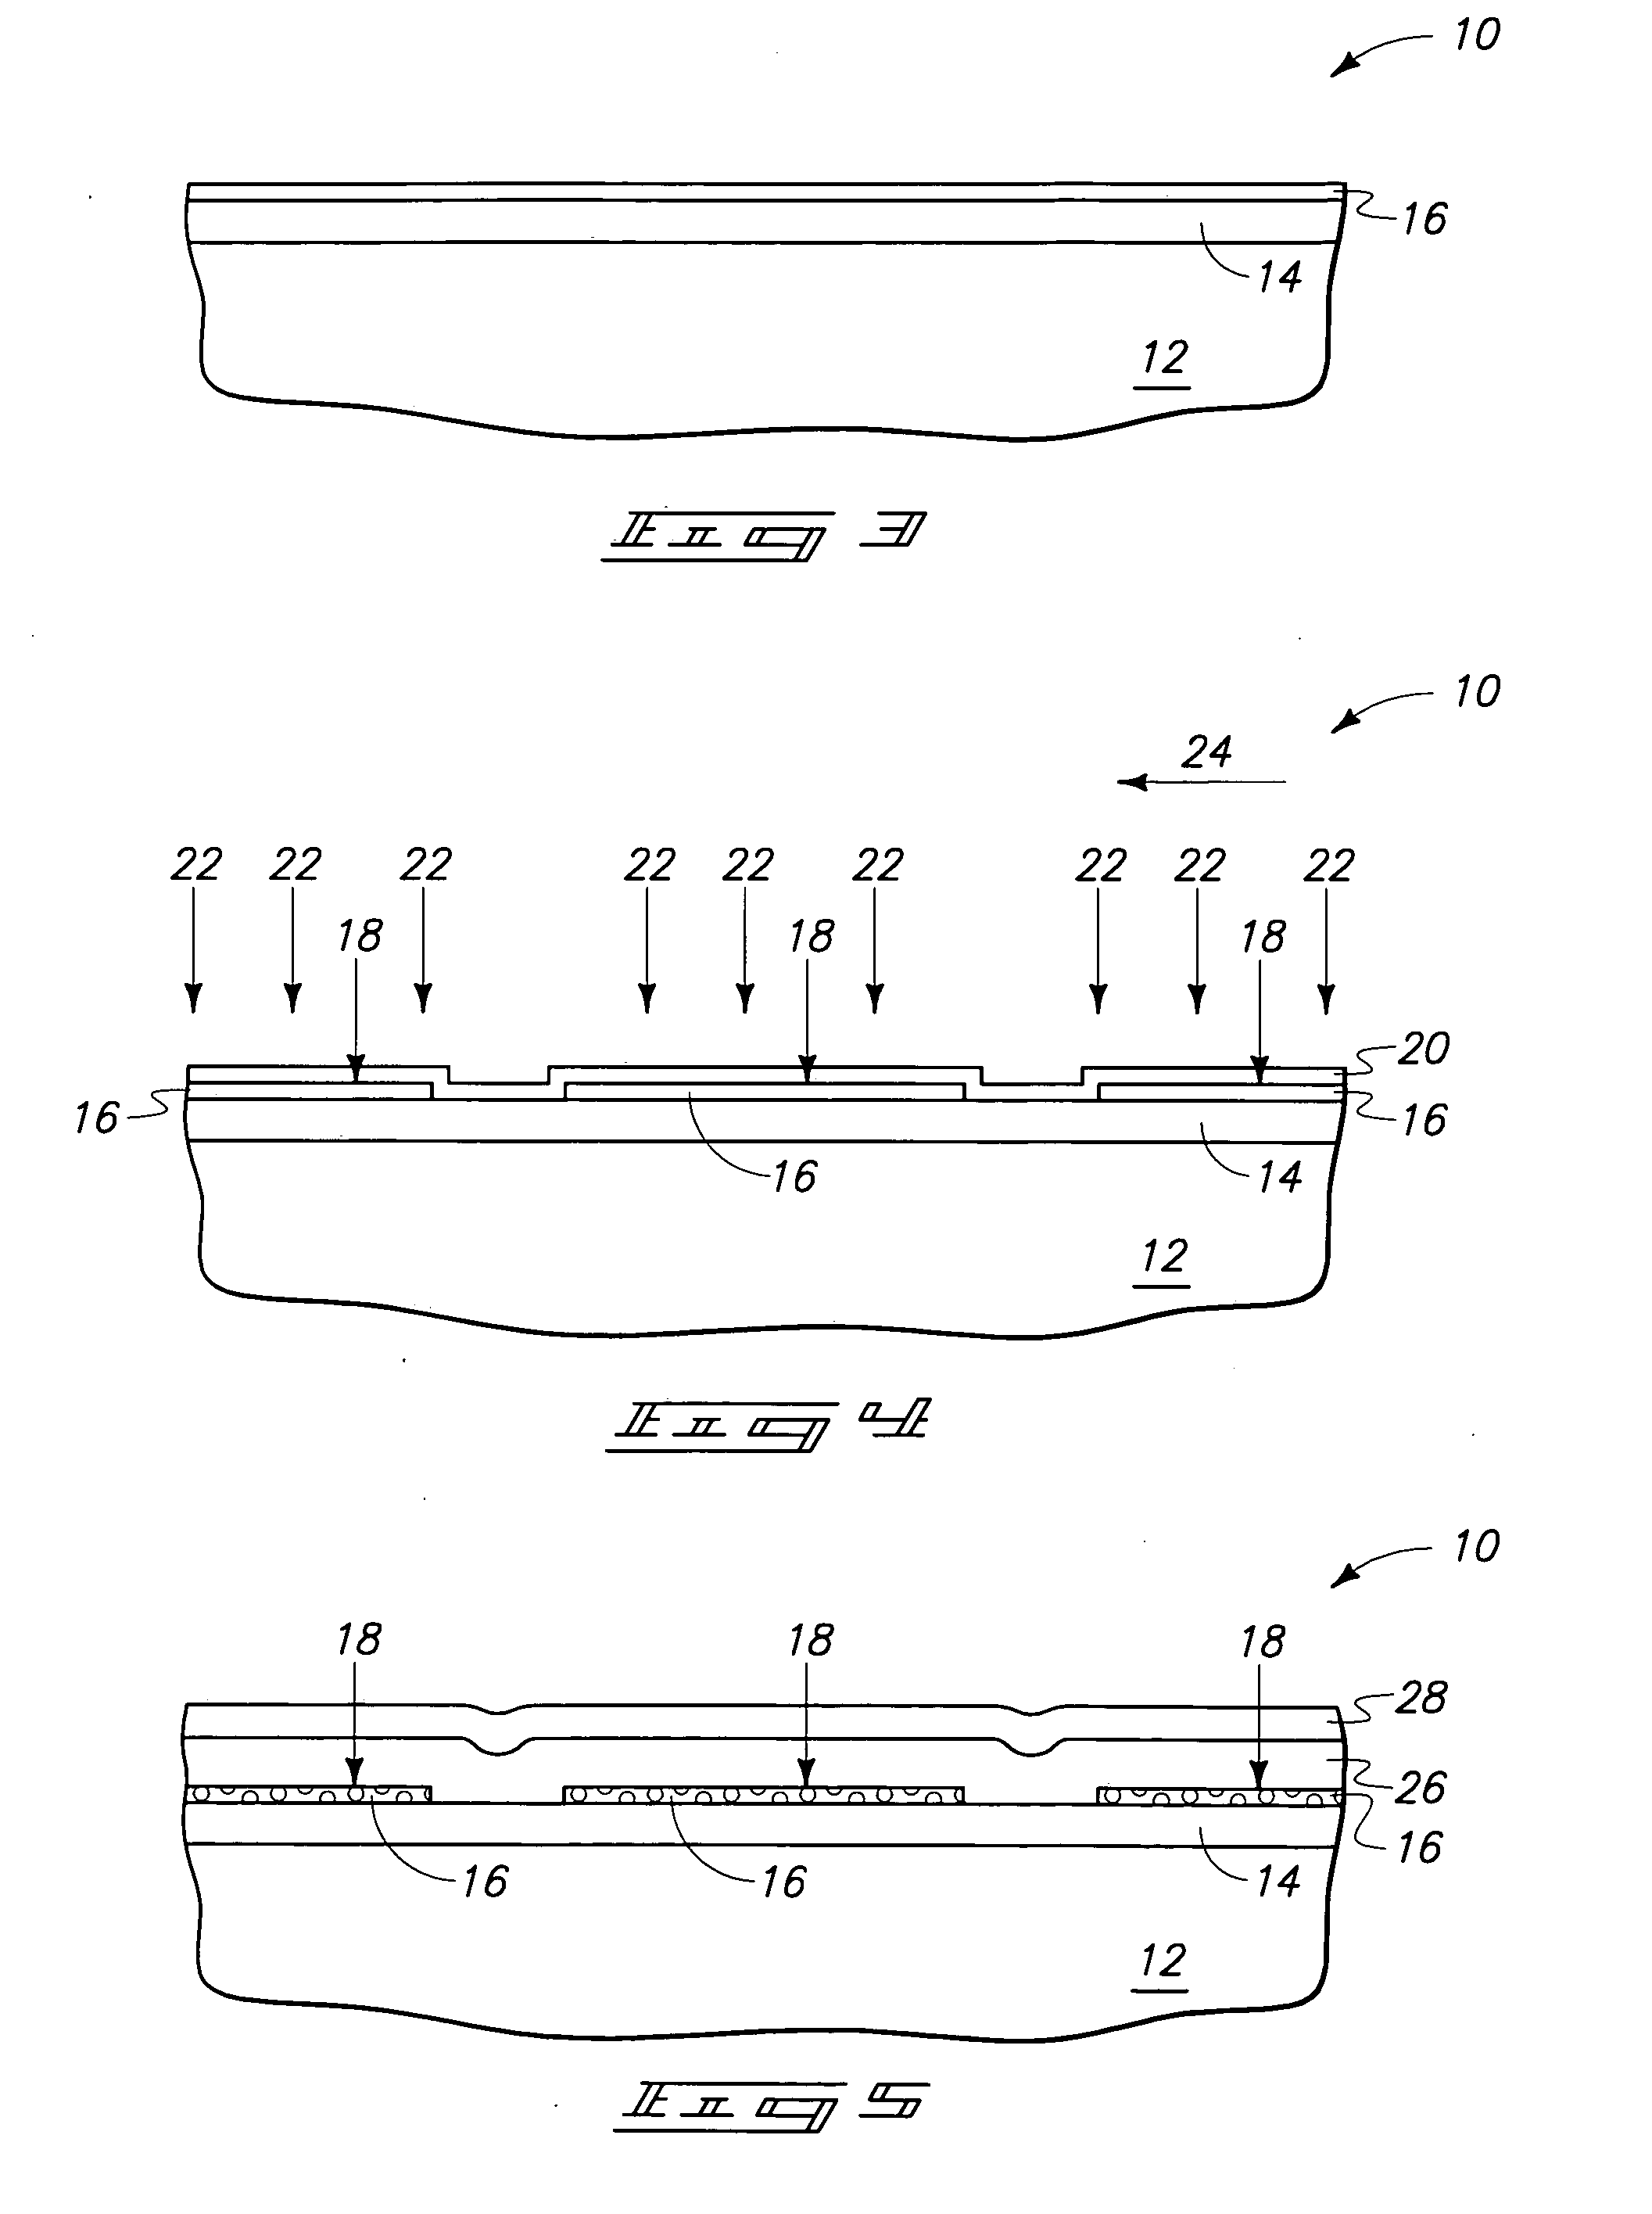 Methods of forming SRAM constructions